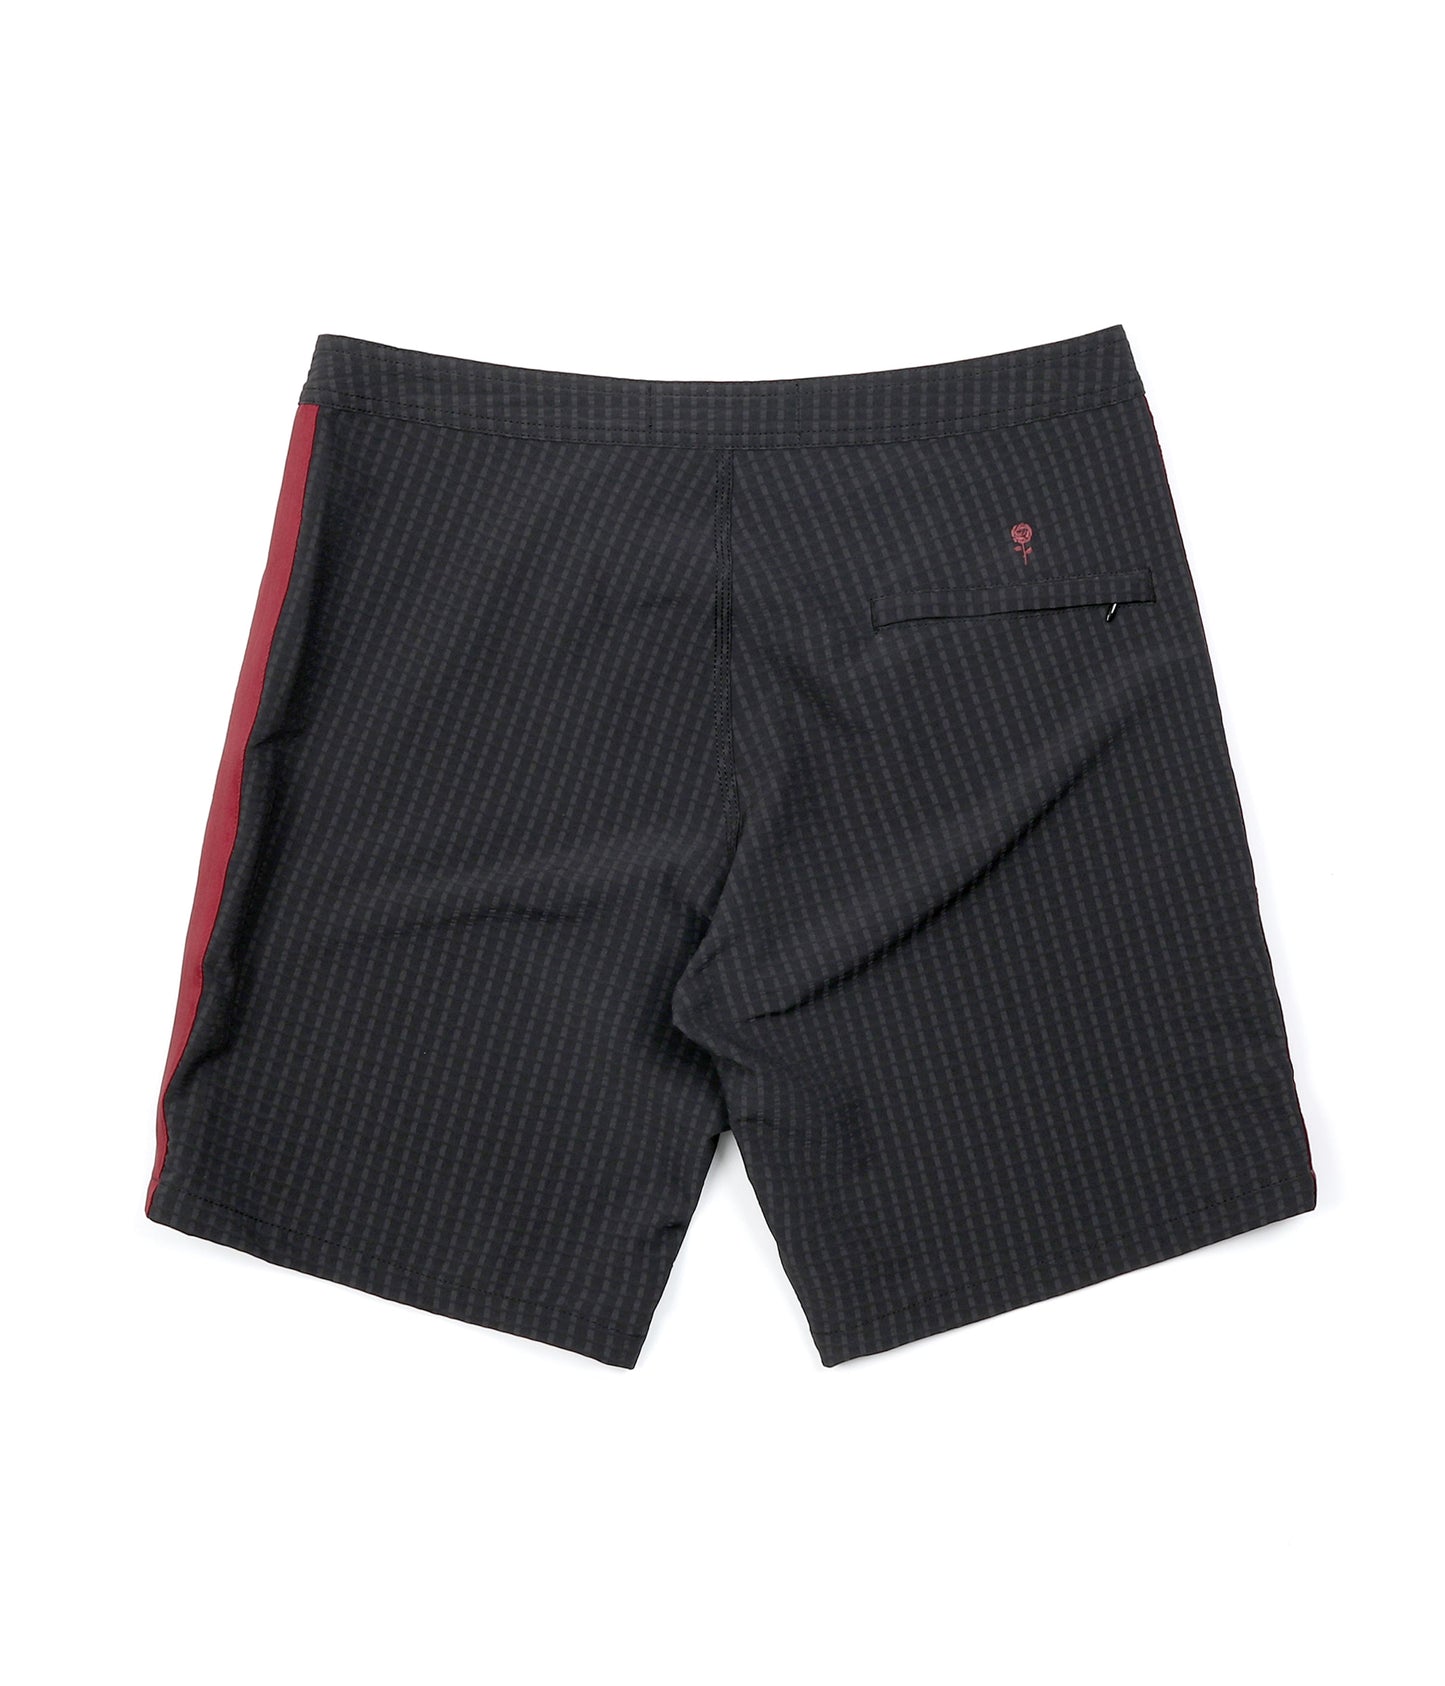 ANDERSON DIVISION TRUNK // BLACK/RED